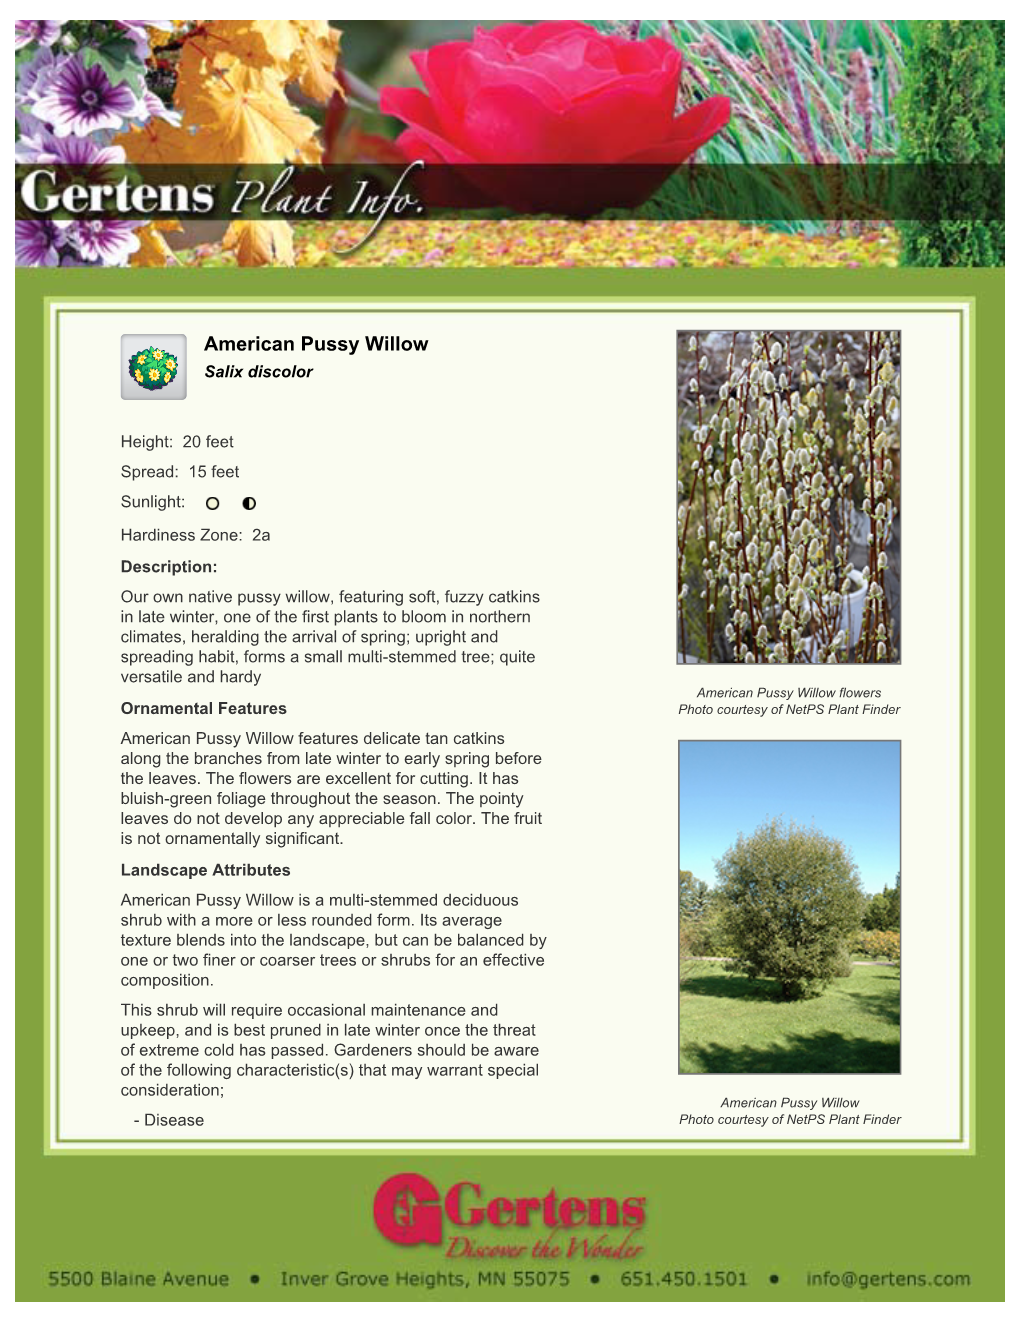 Gertens American Pussy Willow